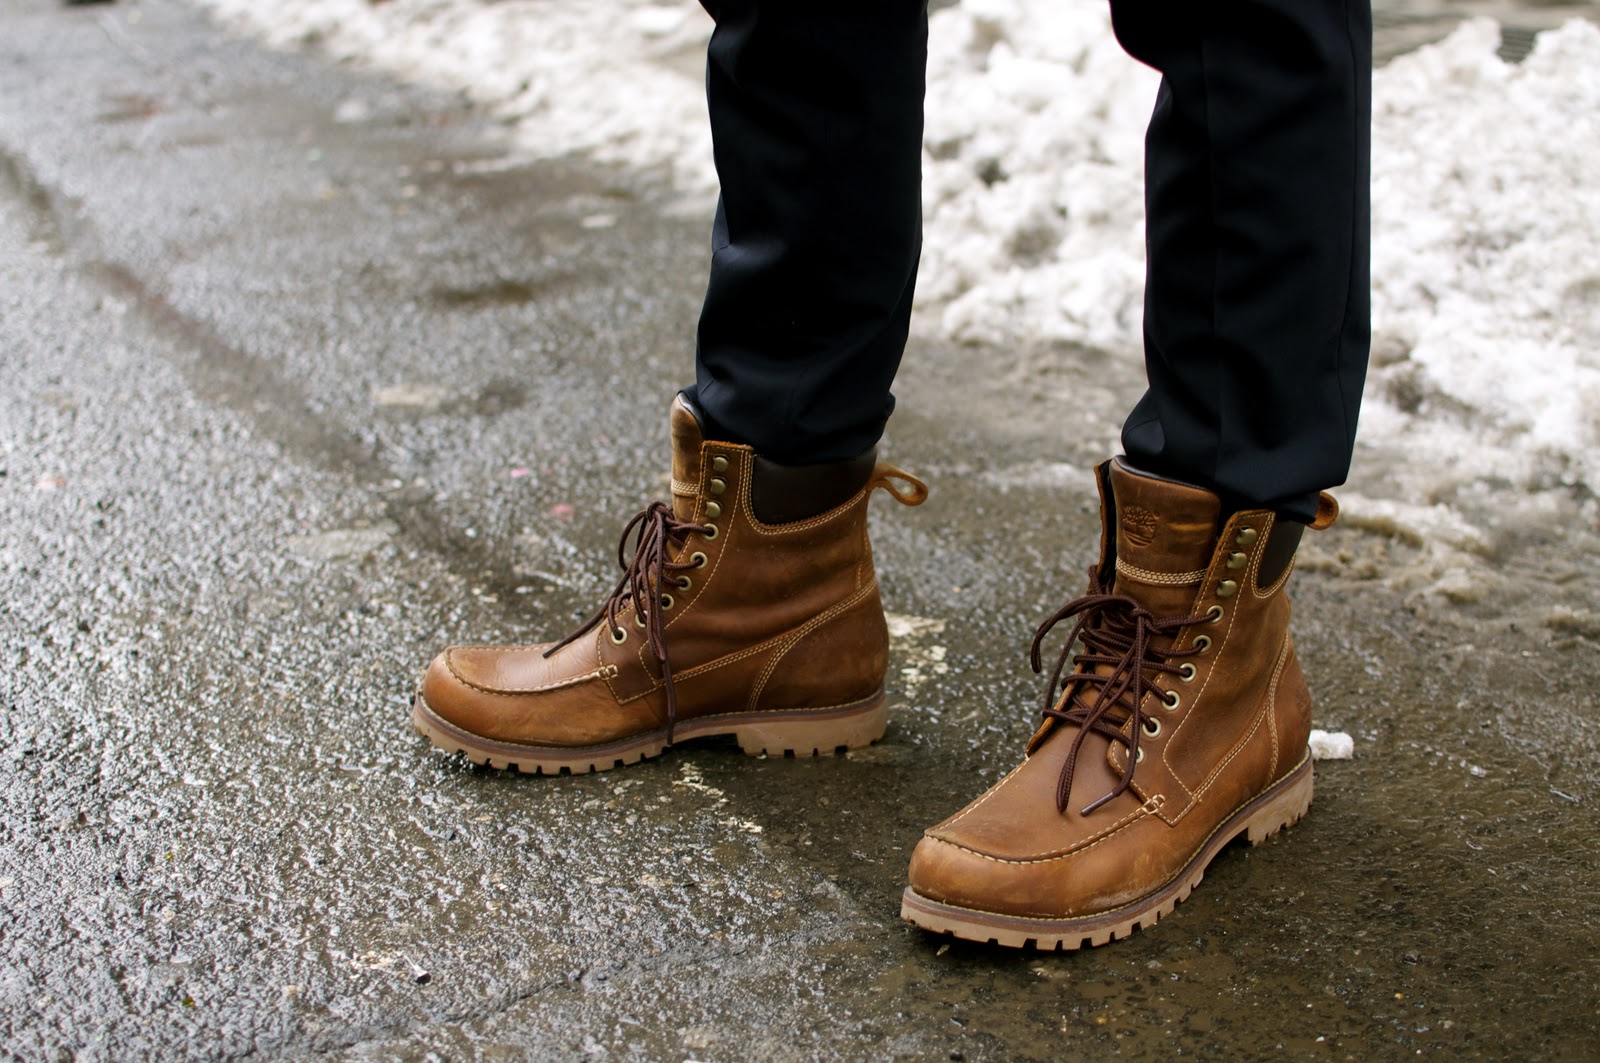 wear work boots for men